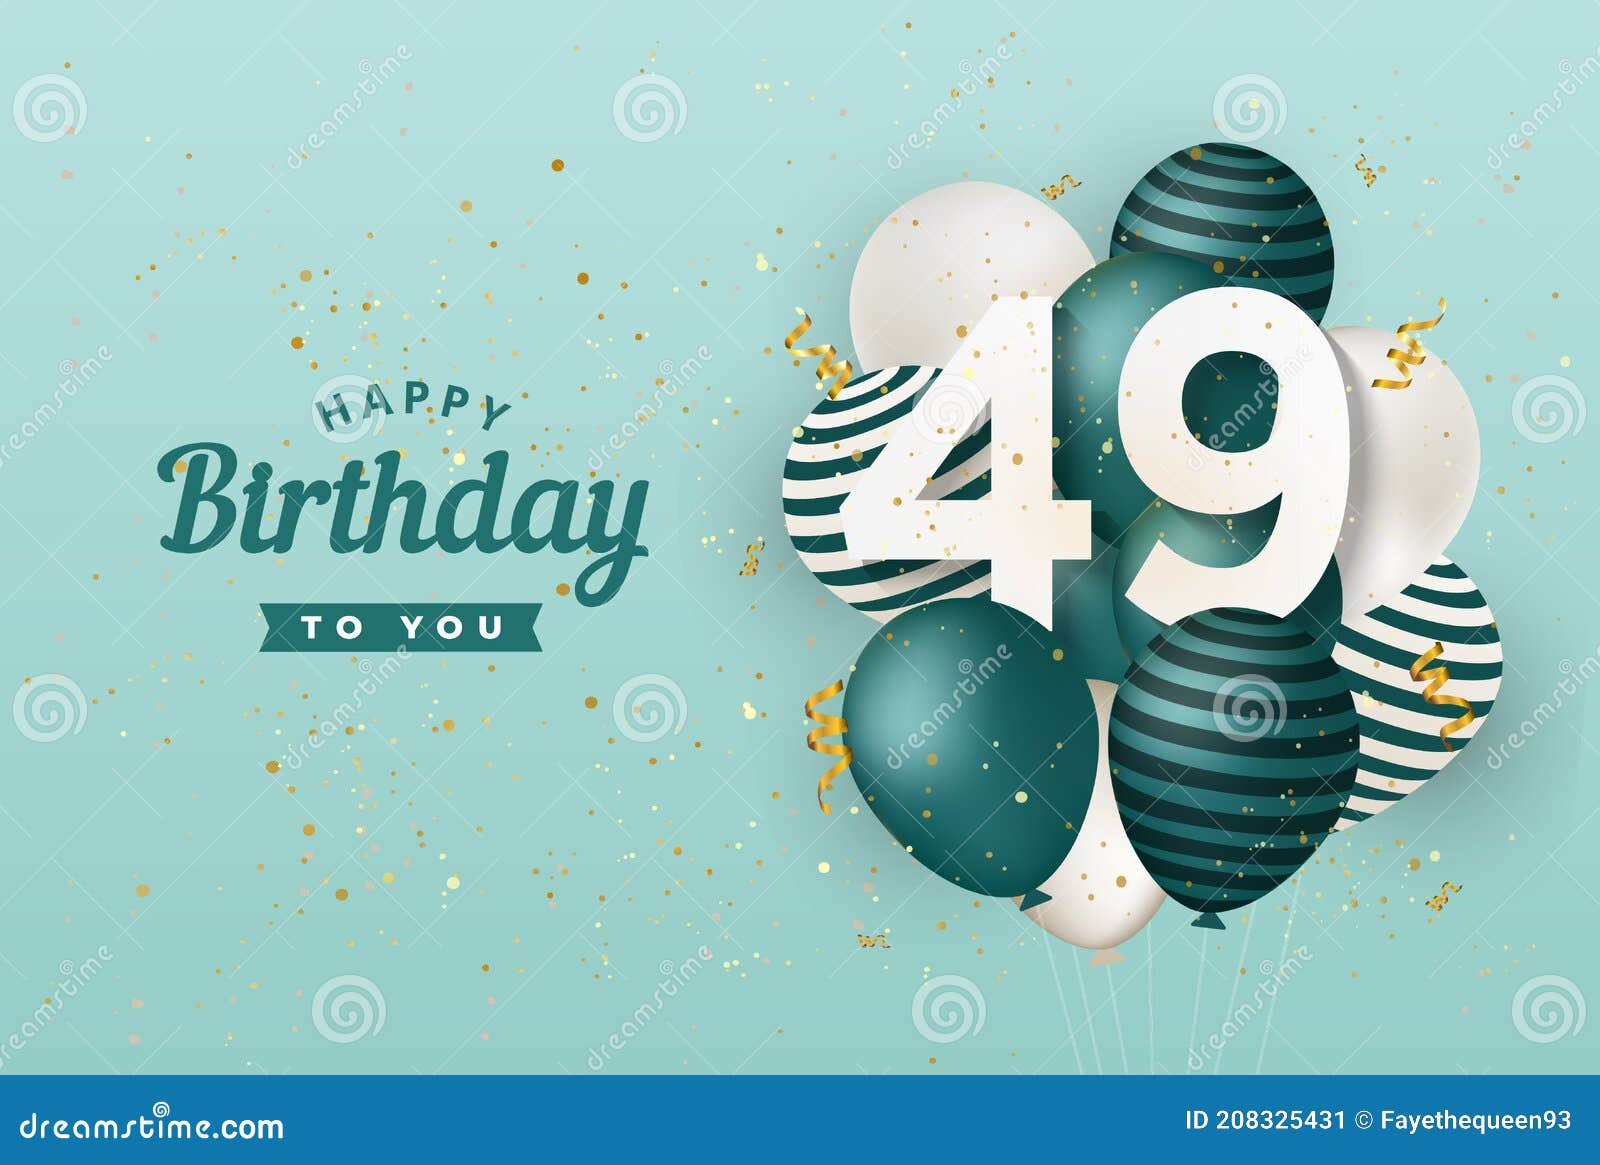 Happy 49th Birthday with Green Balloons Greeting Card Background. Stock Vector - Illustration of ribbon, card: 208325431